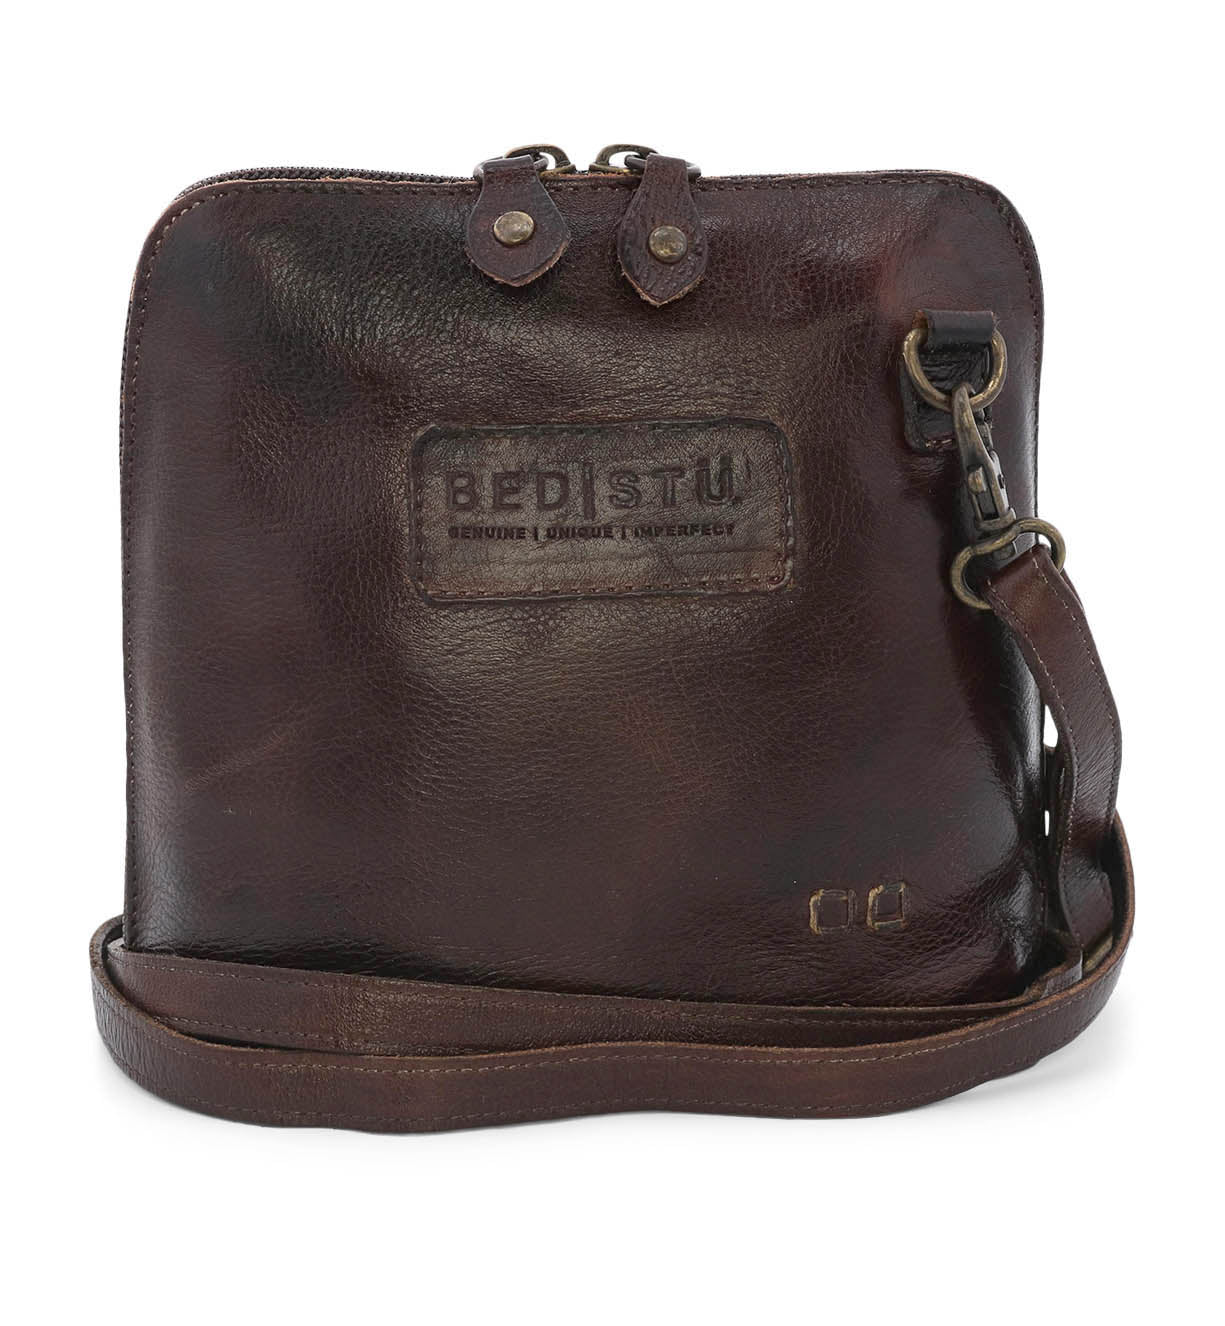 A brown leather Ventura cross body bag with a Bed Stu leather strap.